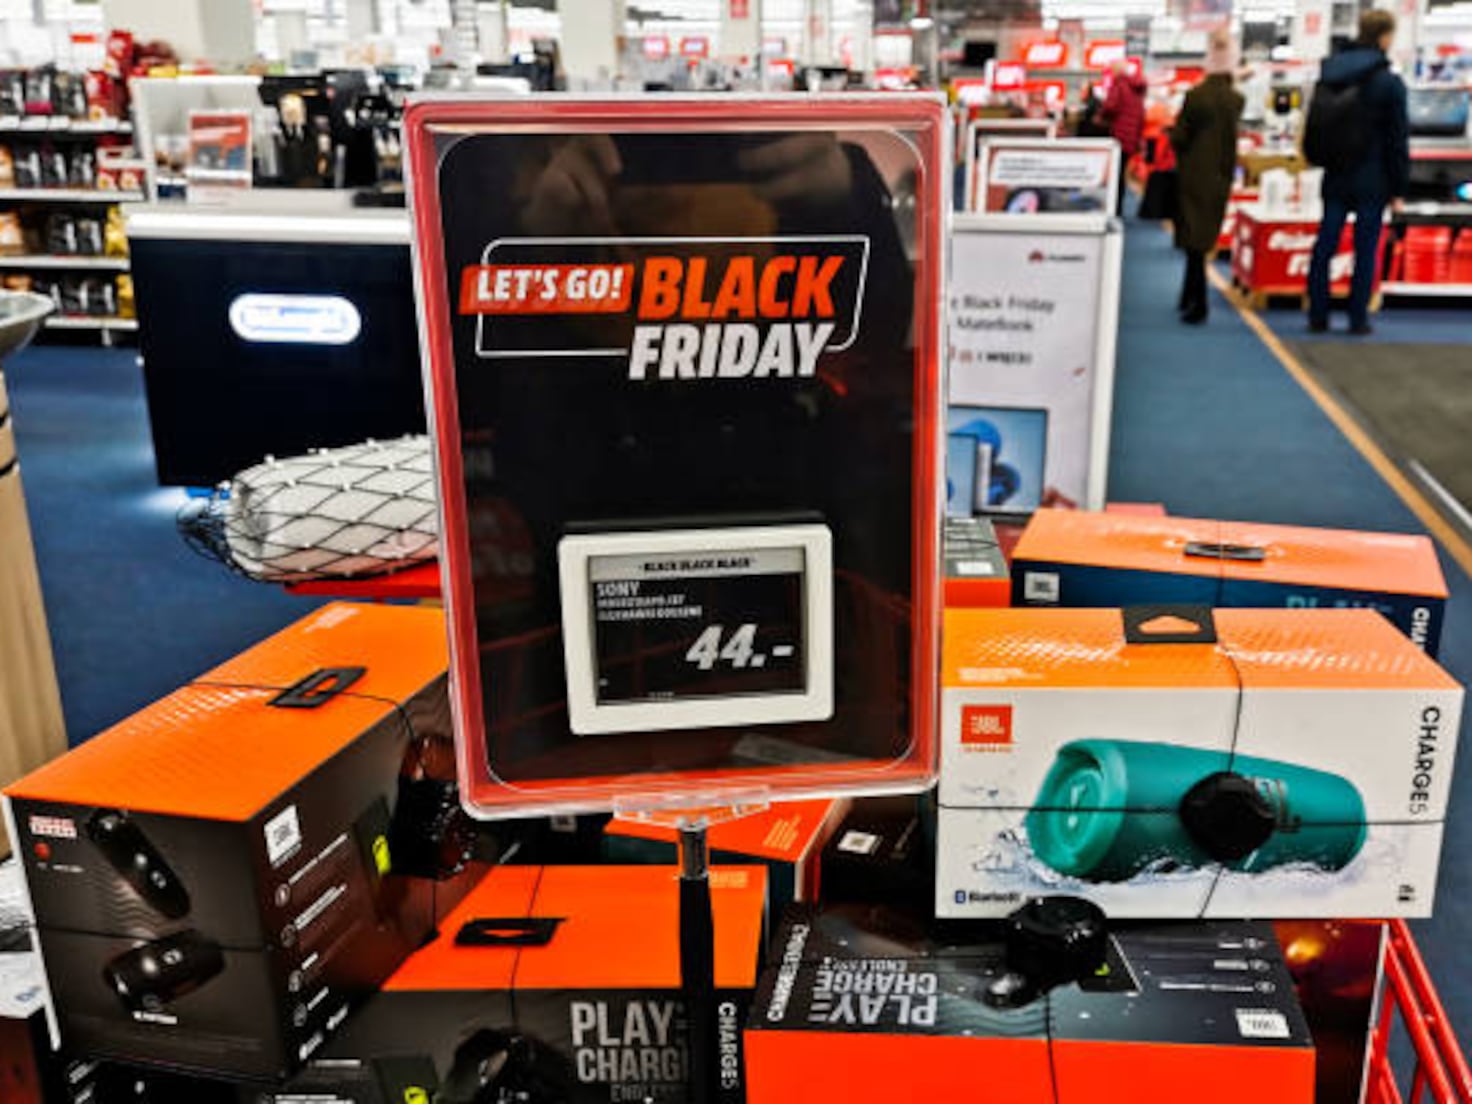 Black Friday Deals: For how long you'll be able to find Black Friday deals?